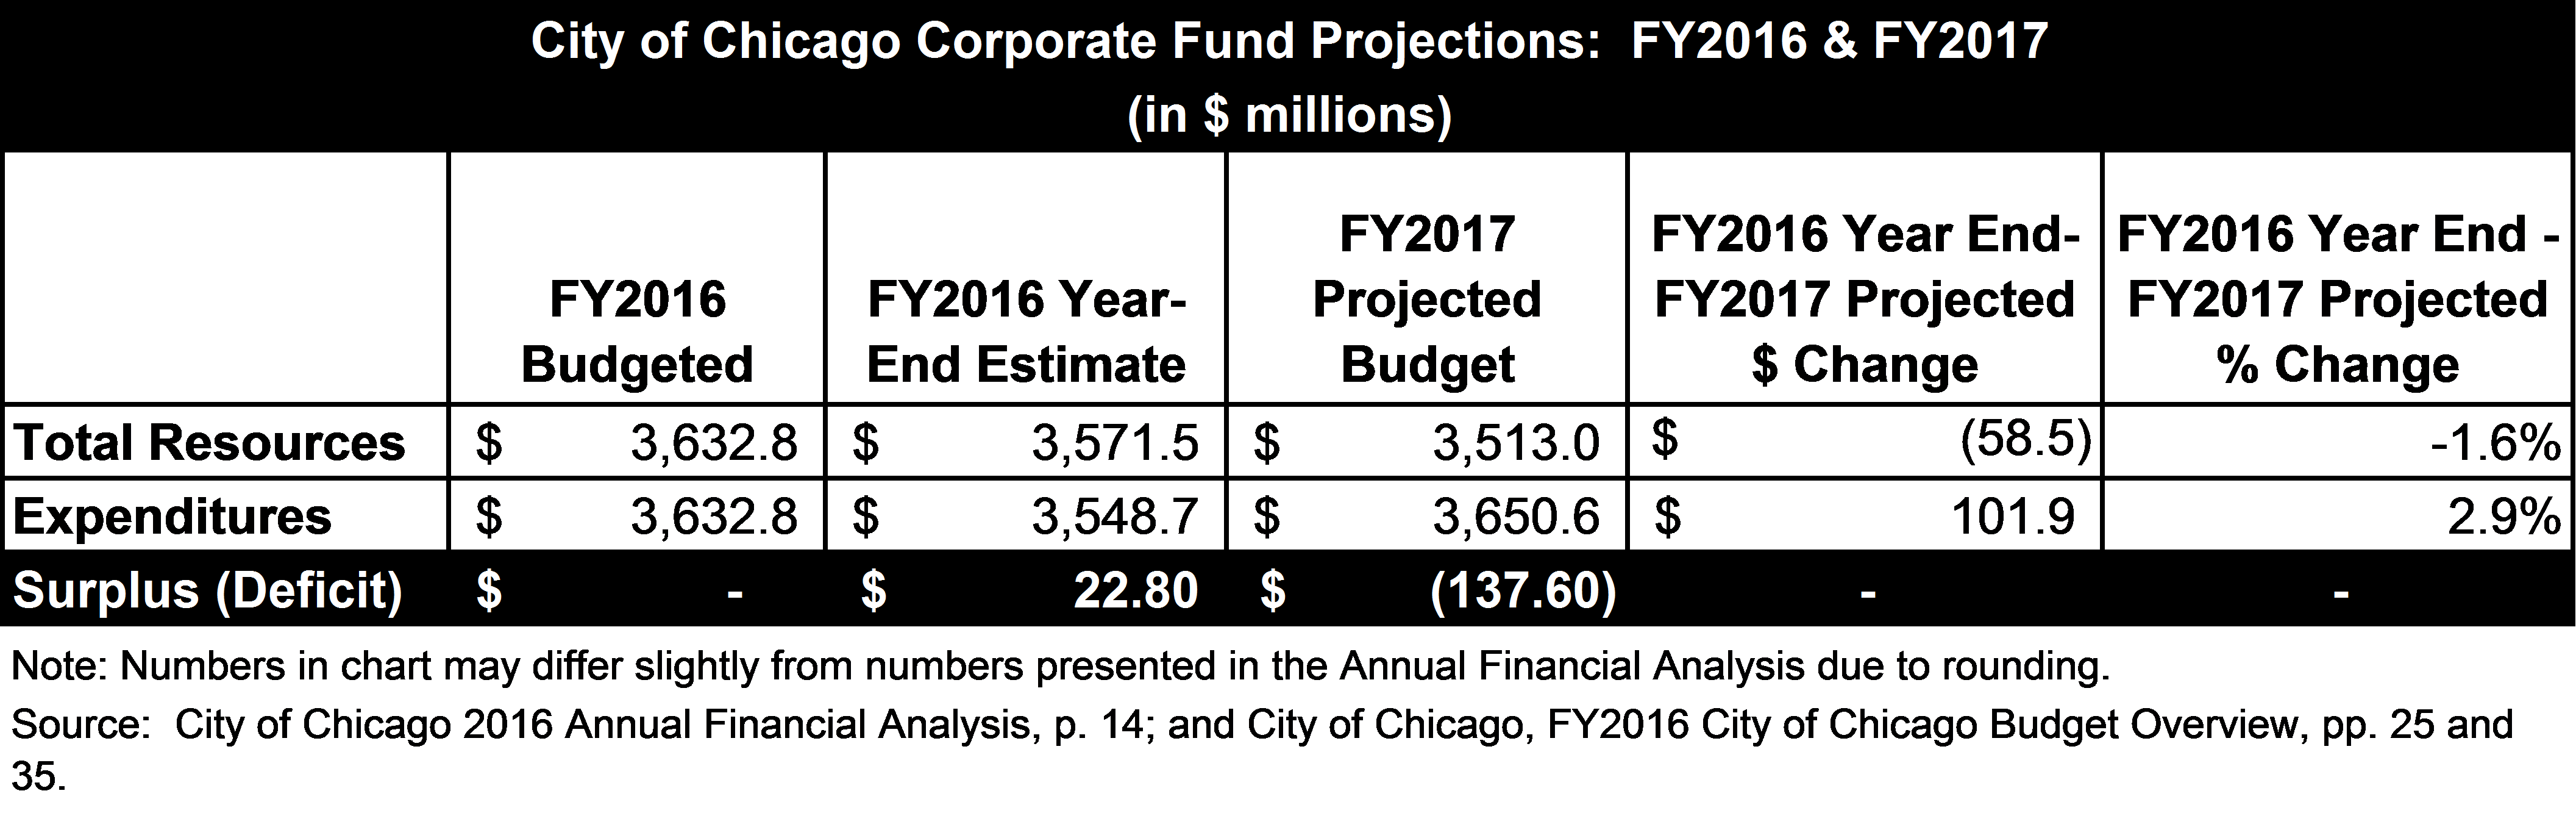 chicago-corporate-fund-projections.png